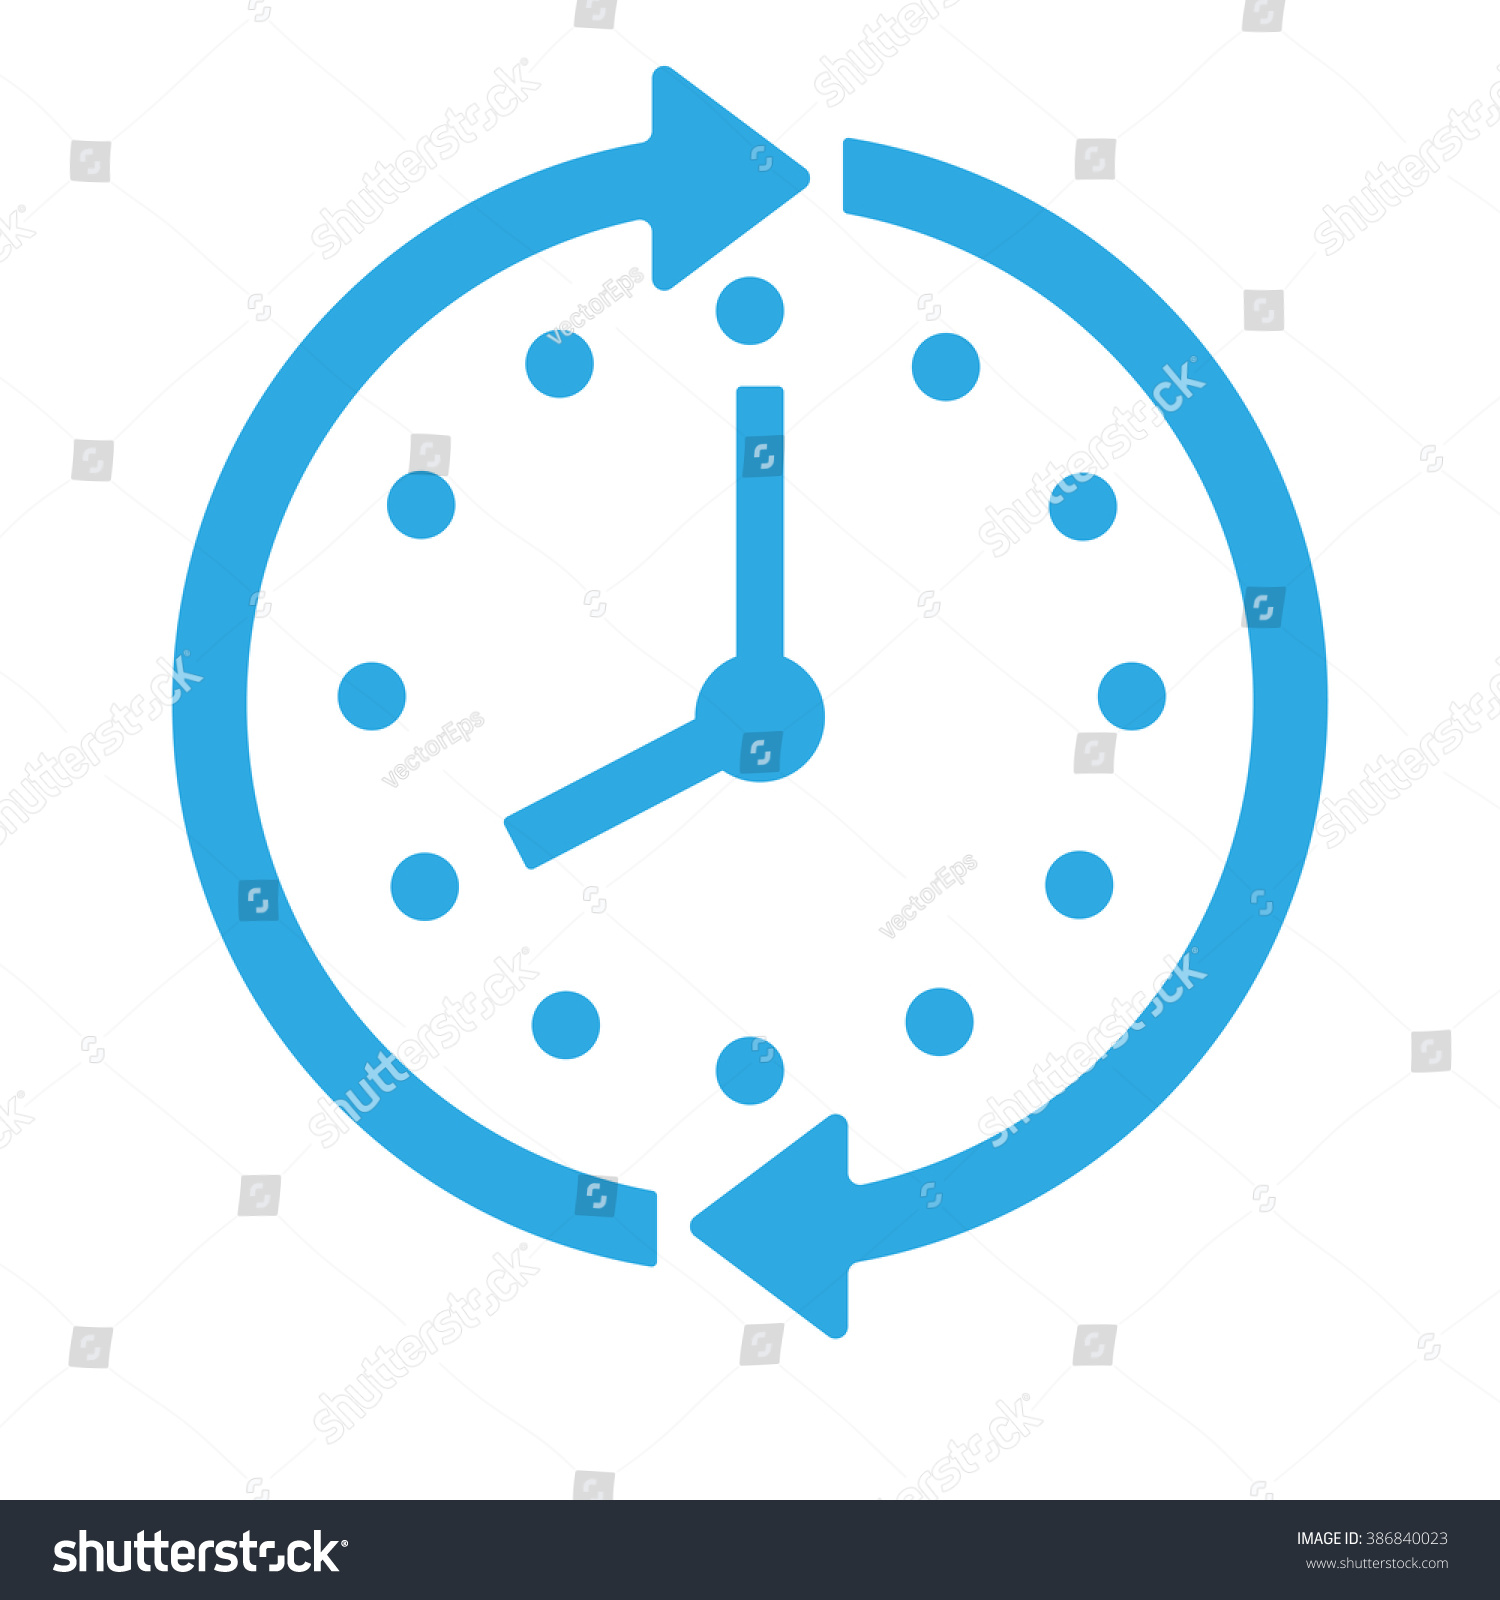 clock icon vector background sign symbol button isolated flat shutterstock app internet concept simple modern business trendy support mobile web